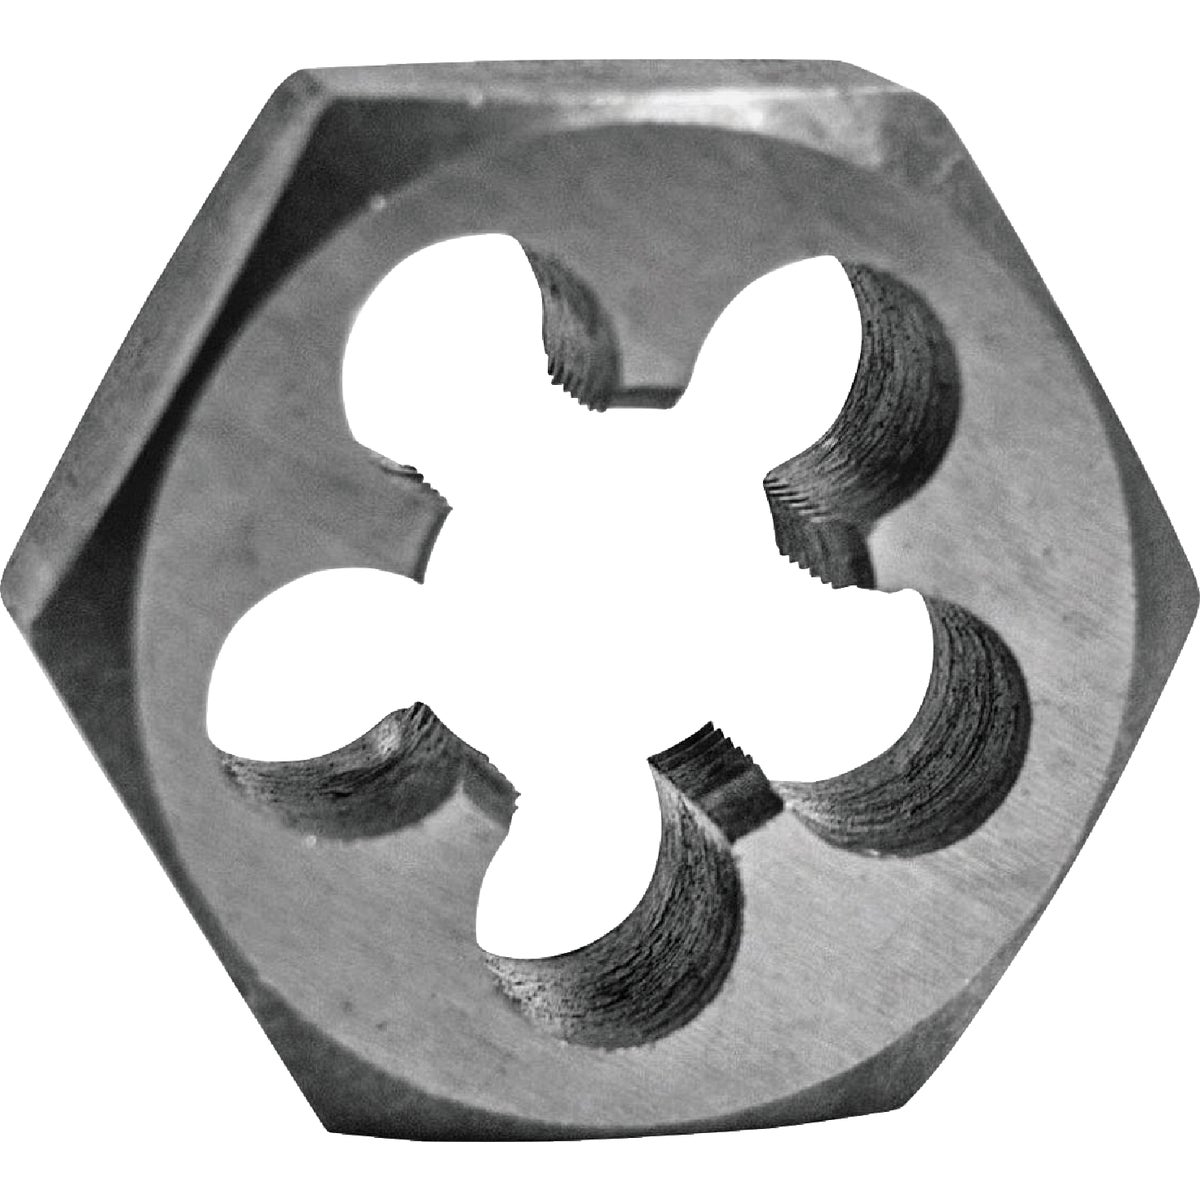 Century Drill & Tool 5/8-11 National Coarse 1-7/16 In. Across Flats Fractional Hexagon Die